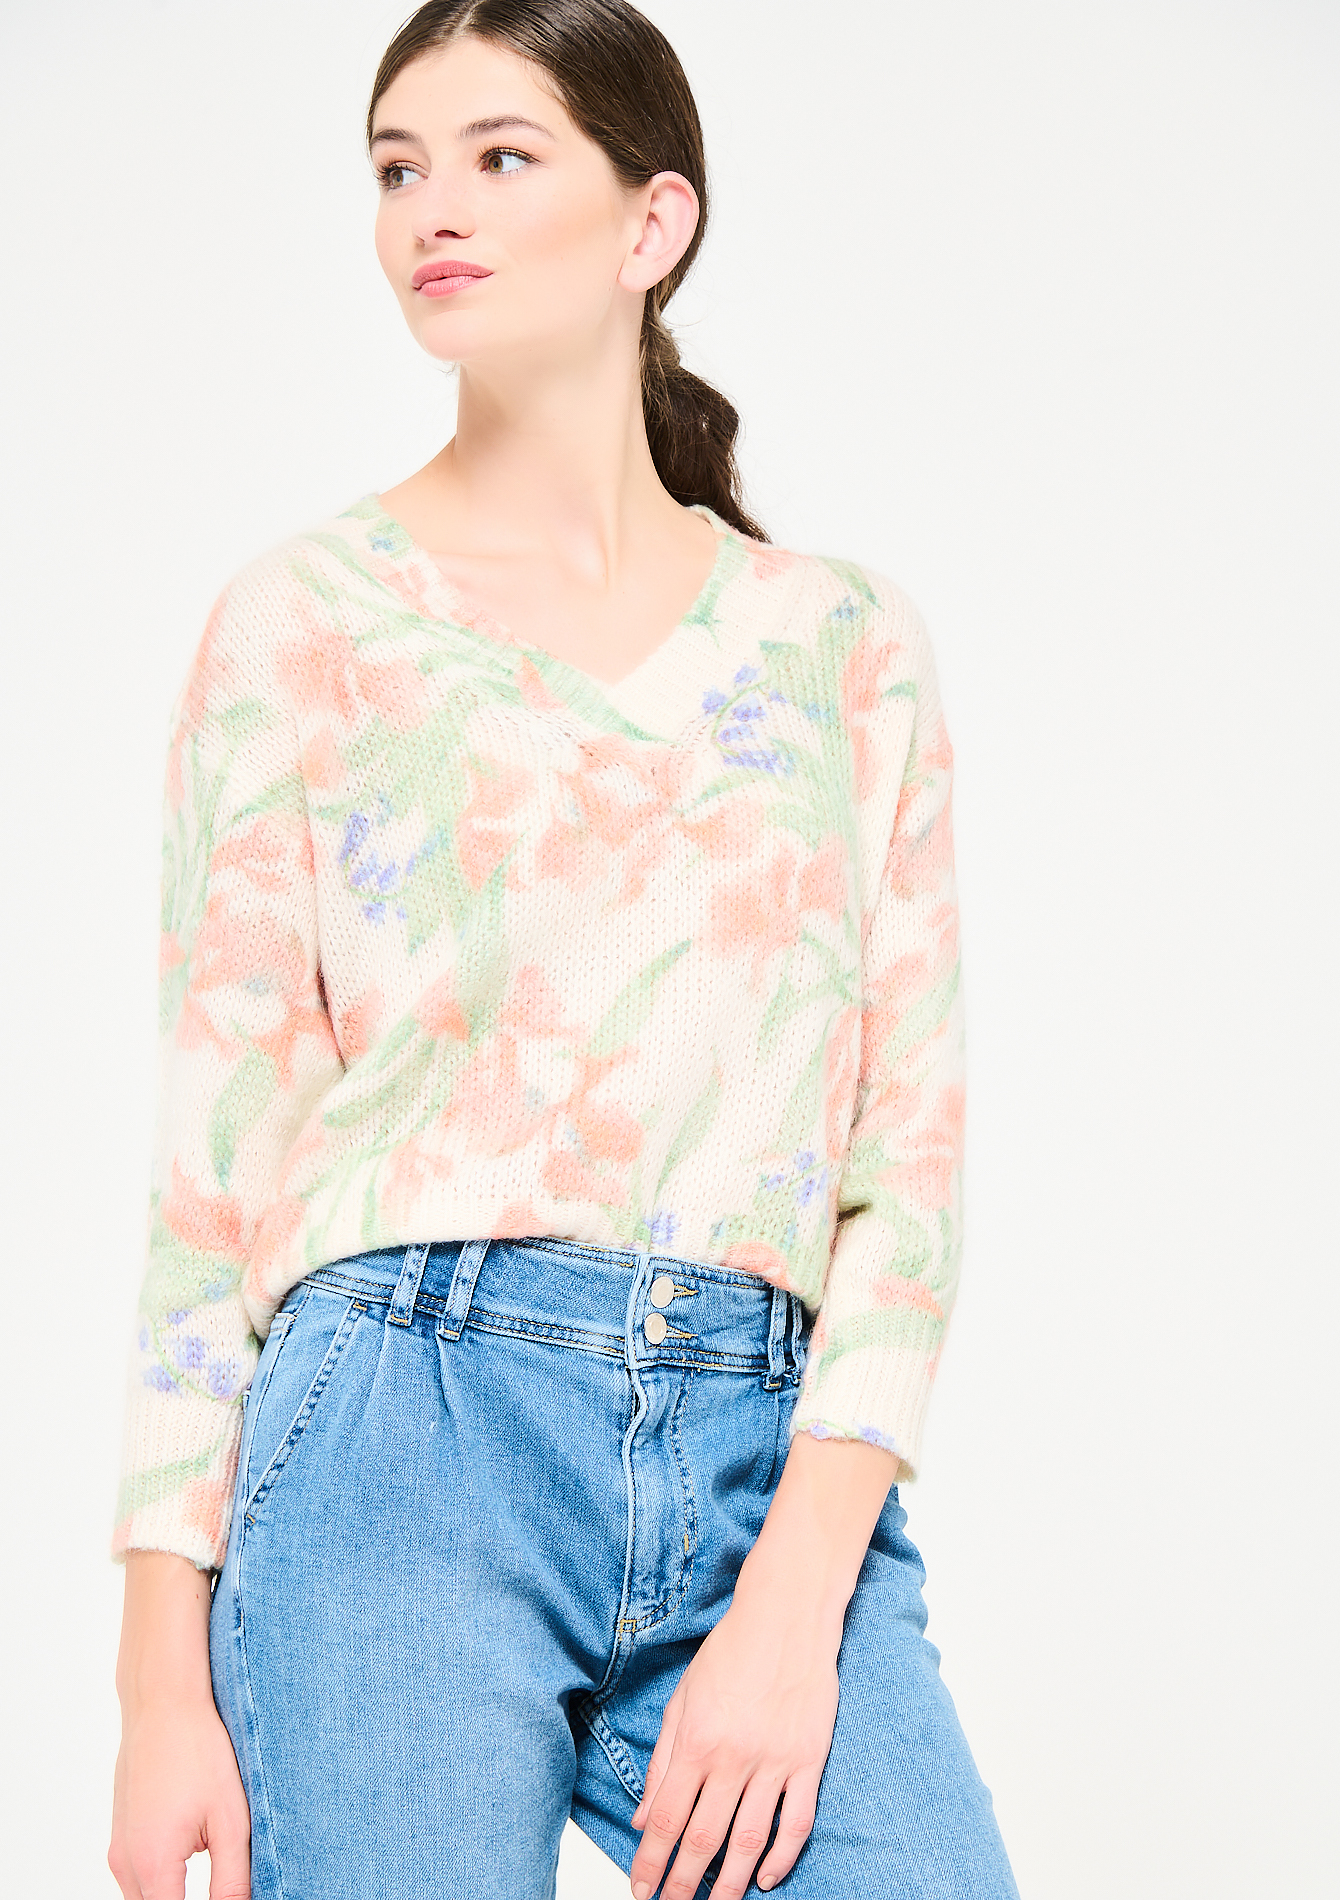 Knitted jumper in floral print - OFFWHITE - 04005699_1001